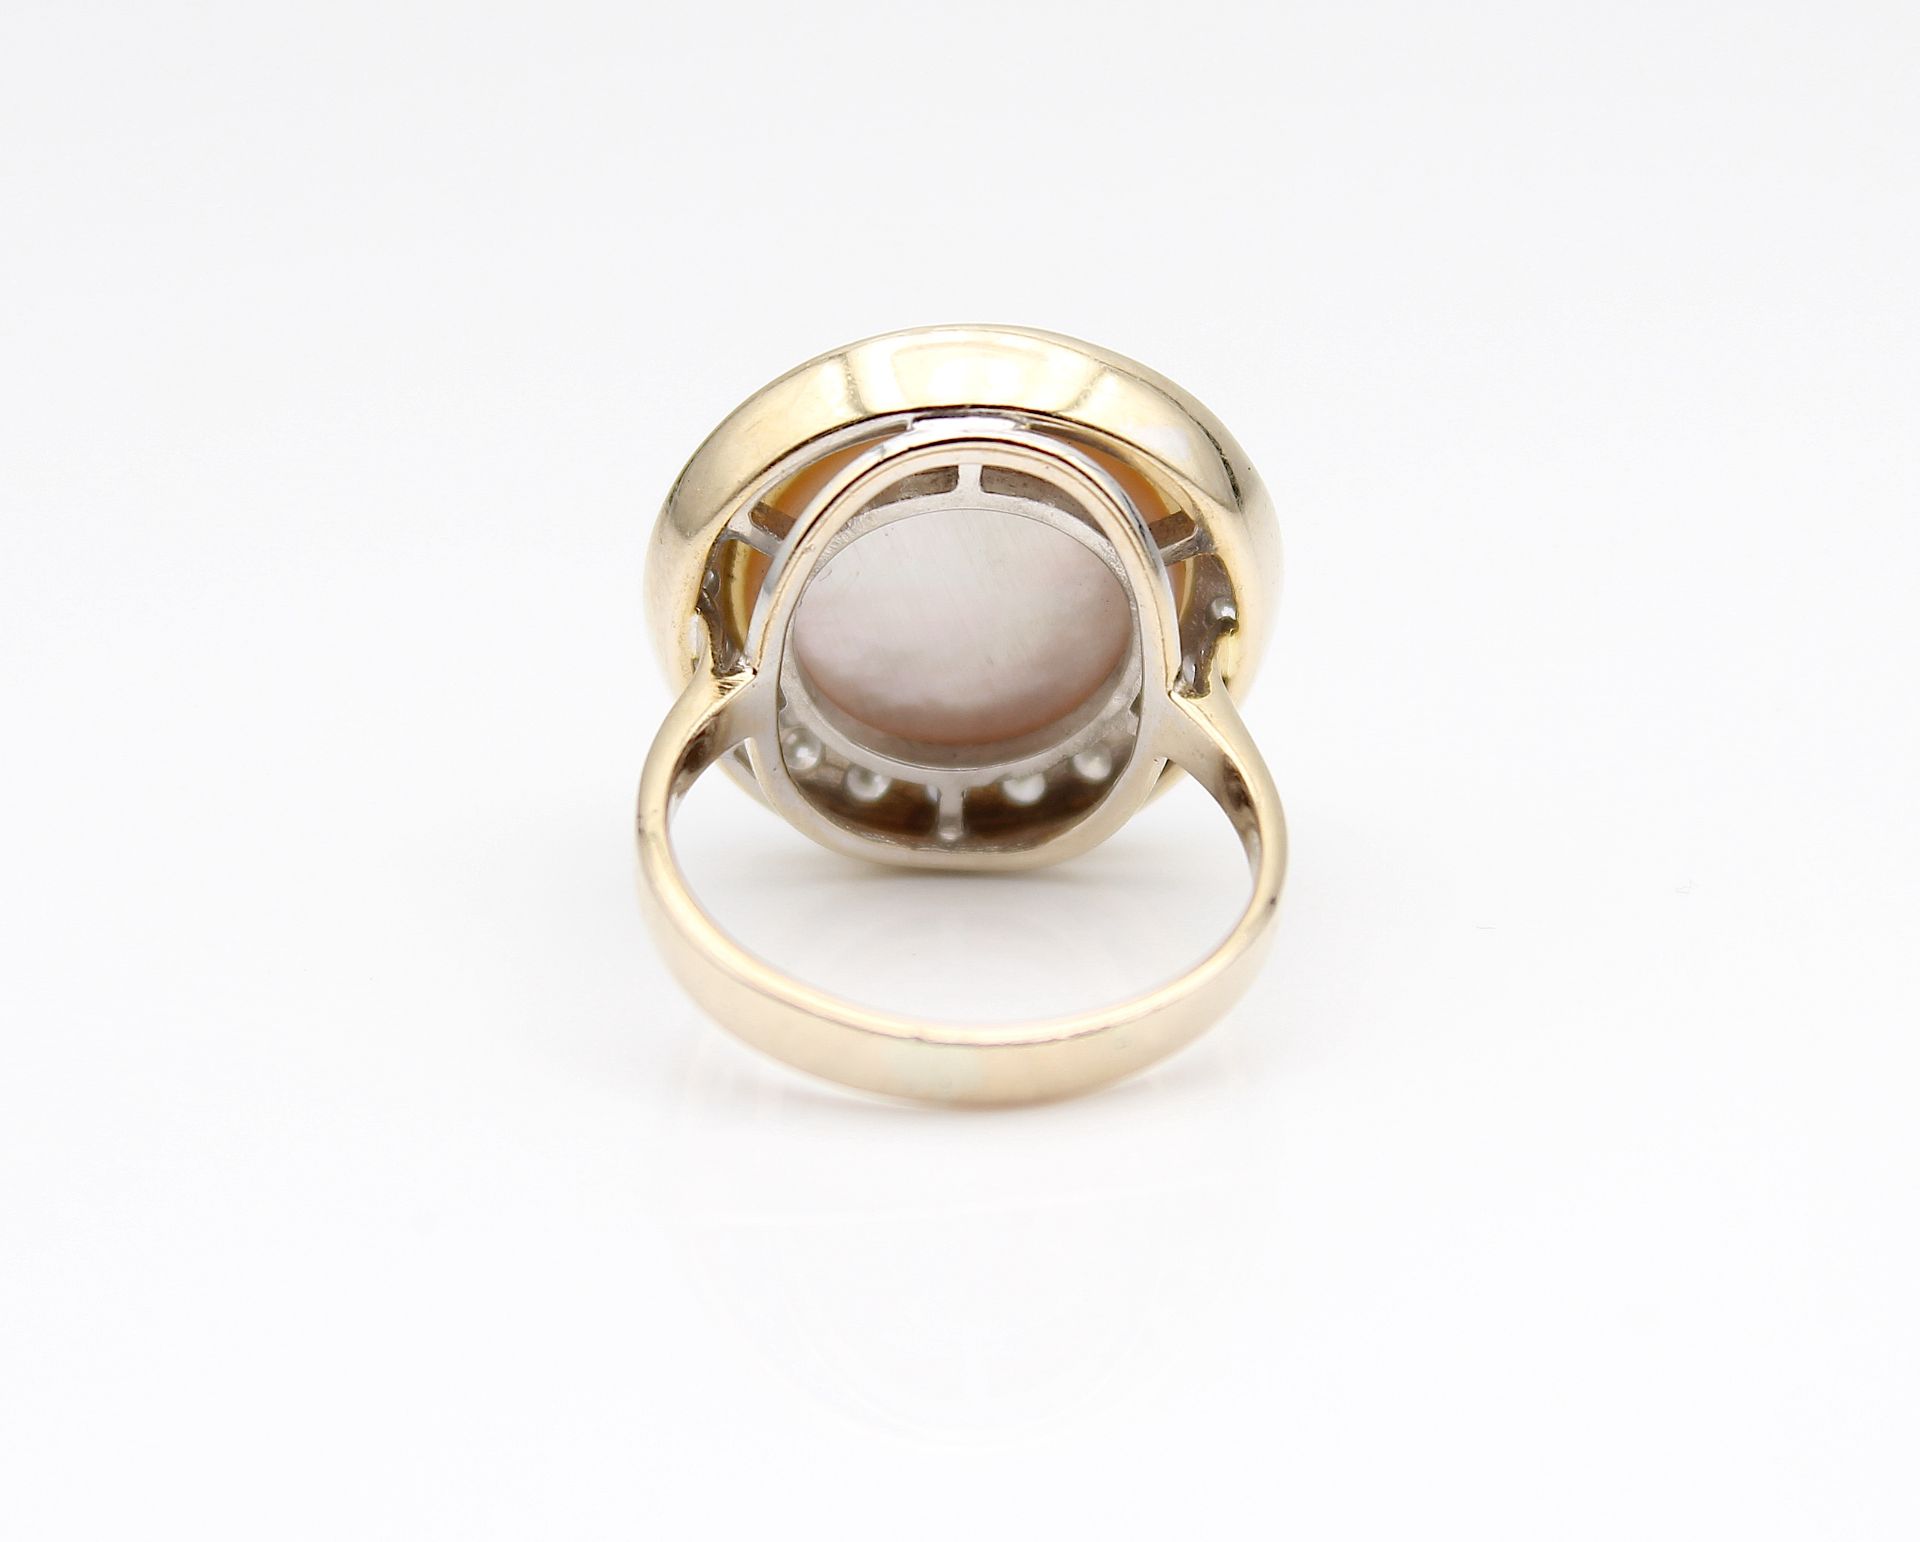 Precious vintage ring with mabe pearl and brilliants - Image 4 of 4